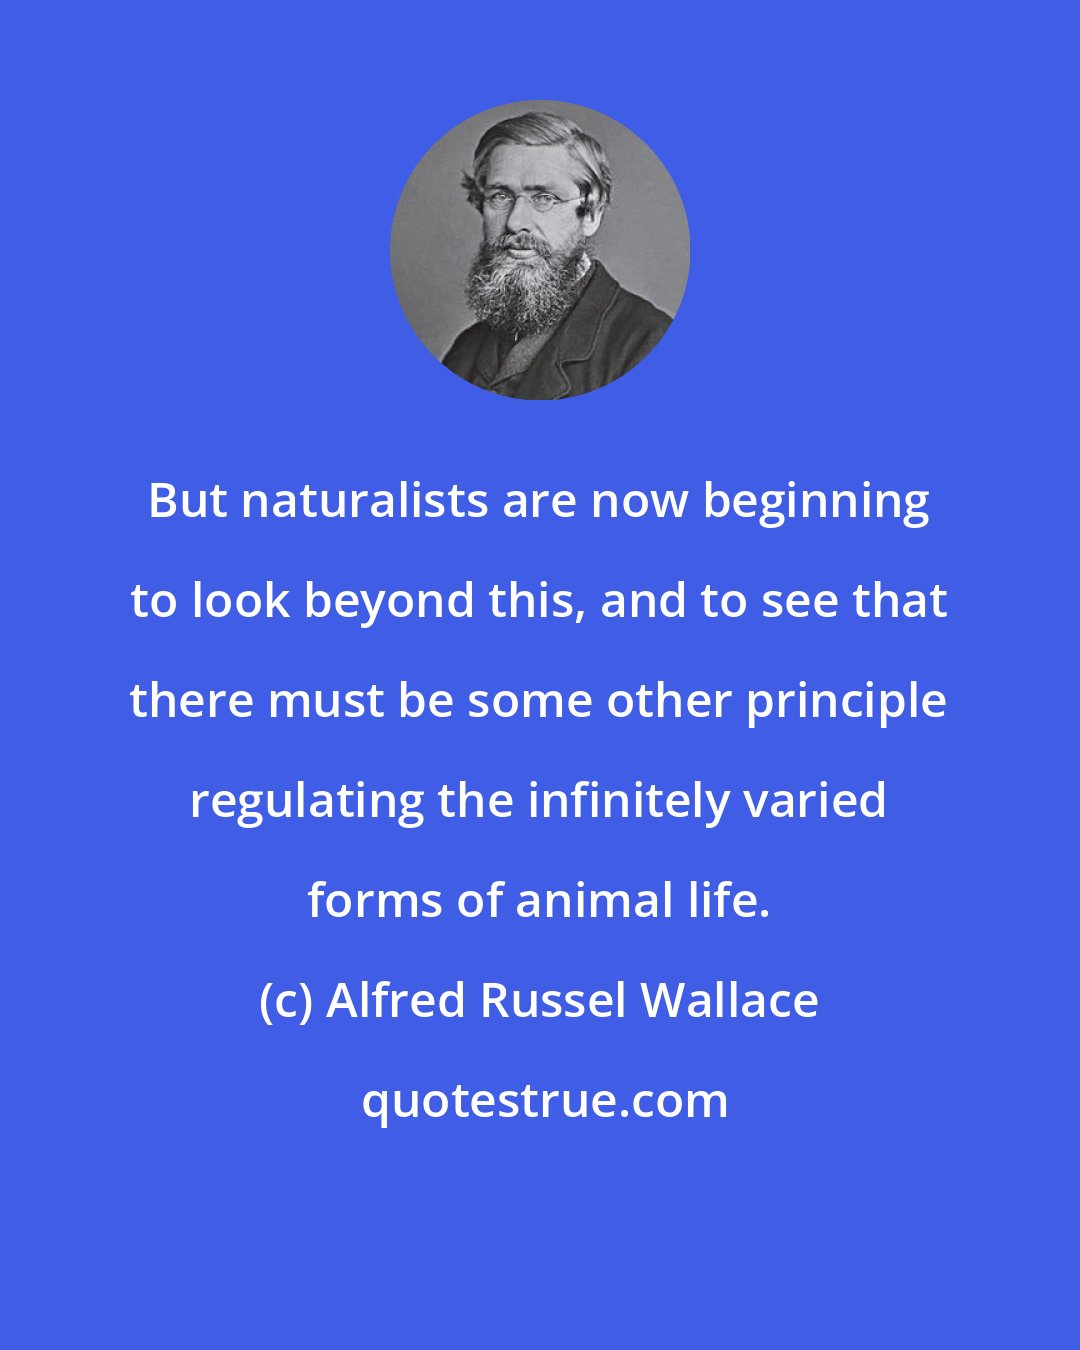 Alfred Russel Wallace: But naturalists are now beginning to look beyond this, and to see that there must be some other principle regulating the infinitely varied forms of animal life.